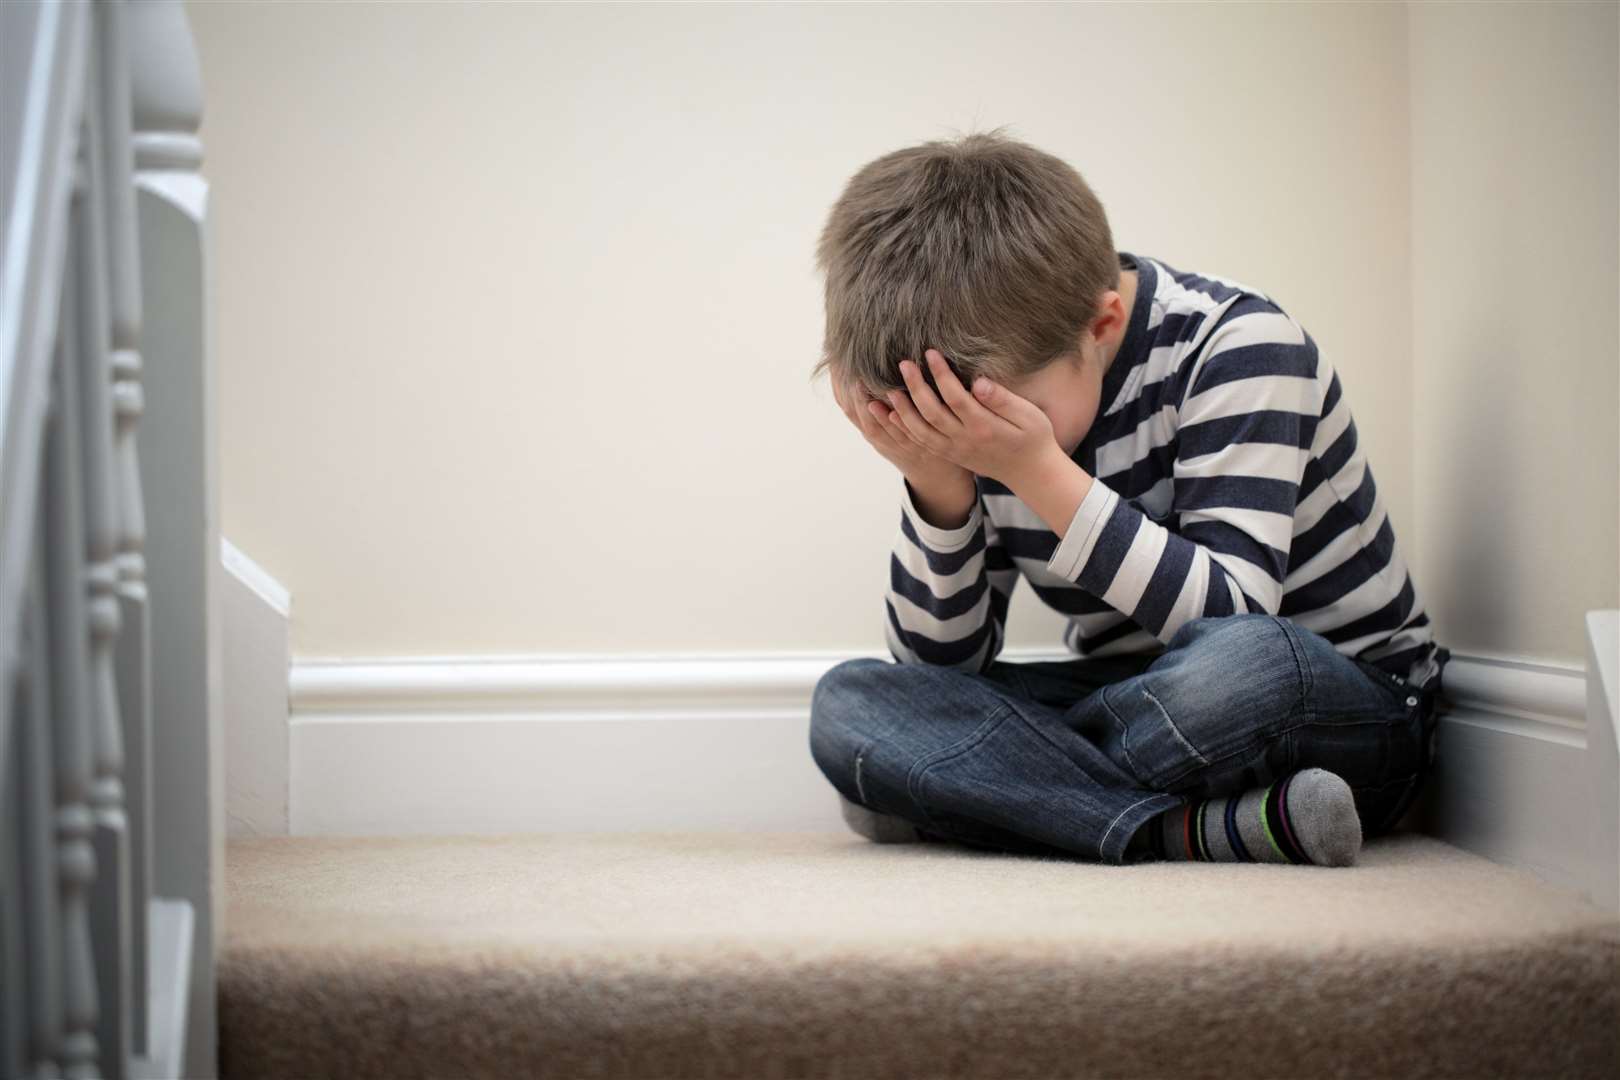 People in Wales are asked to report any incidents where children are seen being physically punished by their parents. Image: iStock photo.